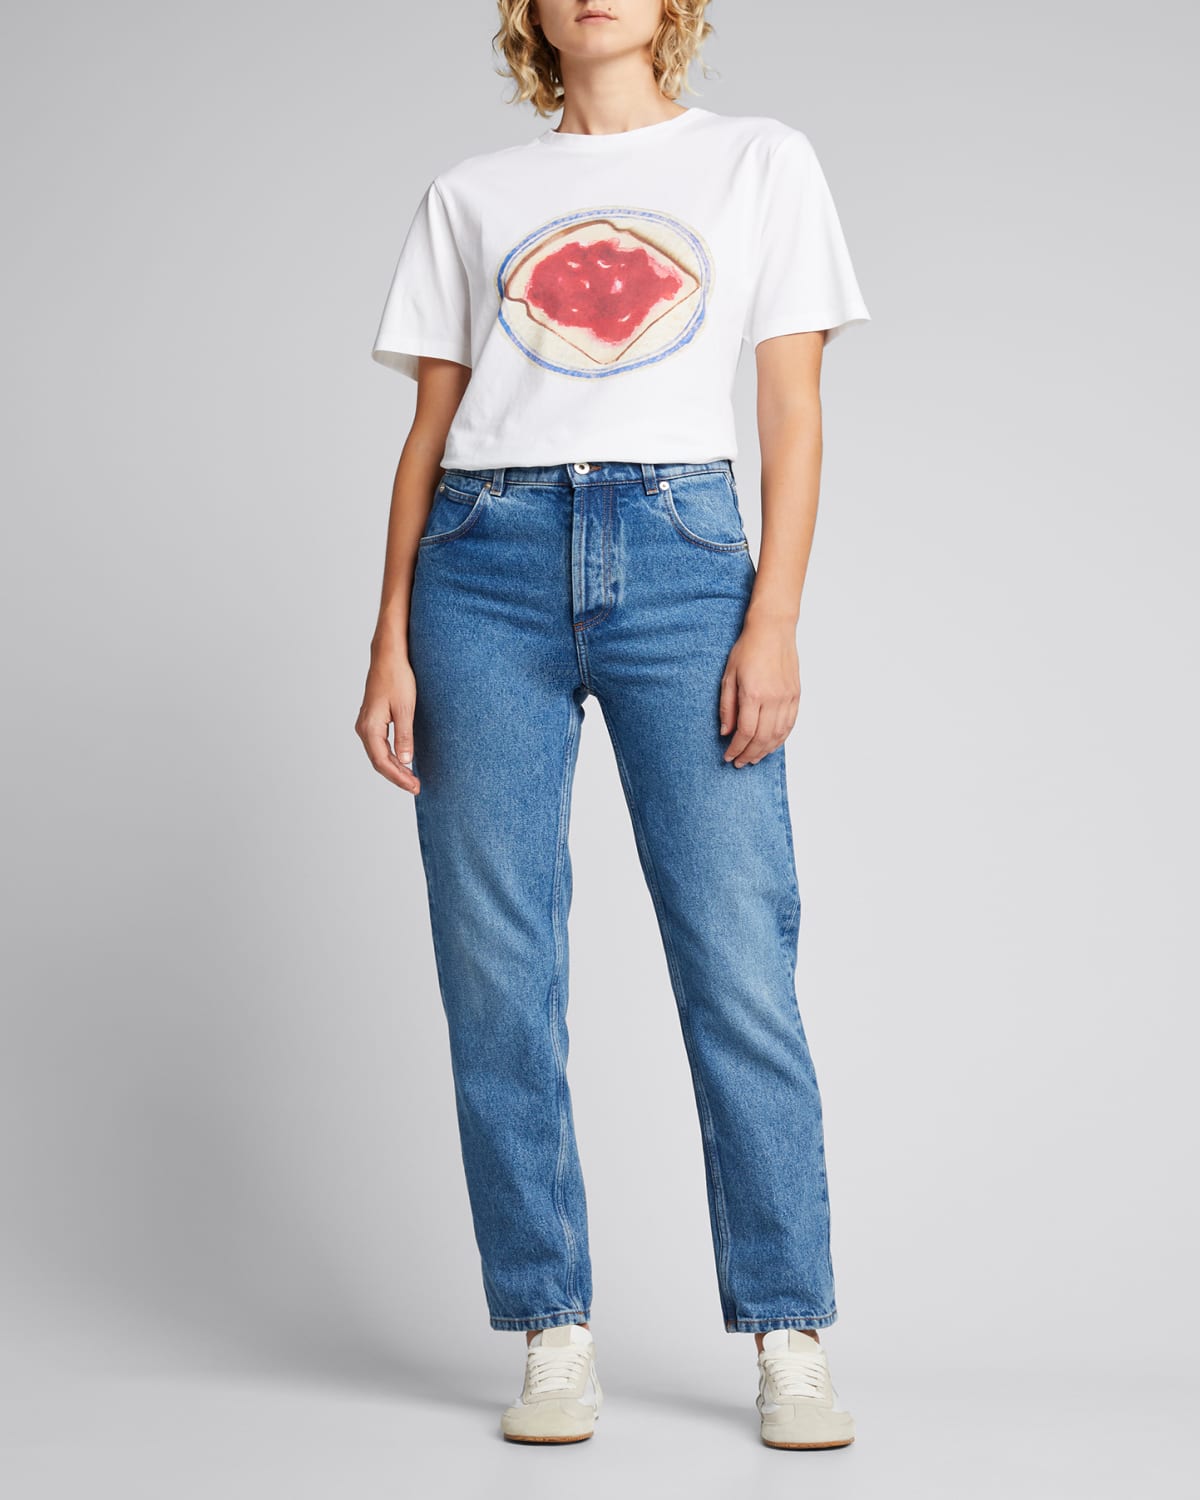 Women's LOEWE Jeans On Sale, Up To 70% Off | ModeSens